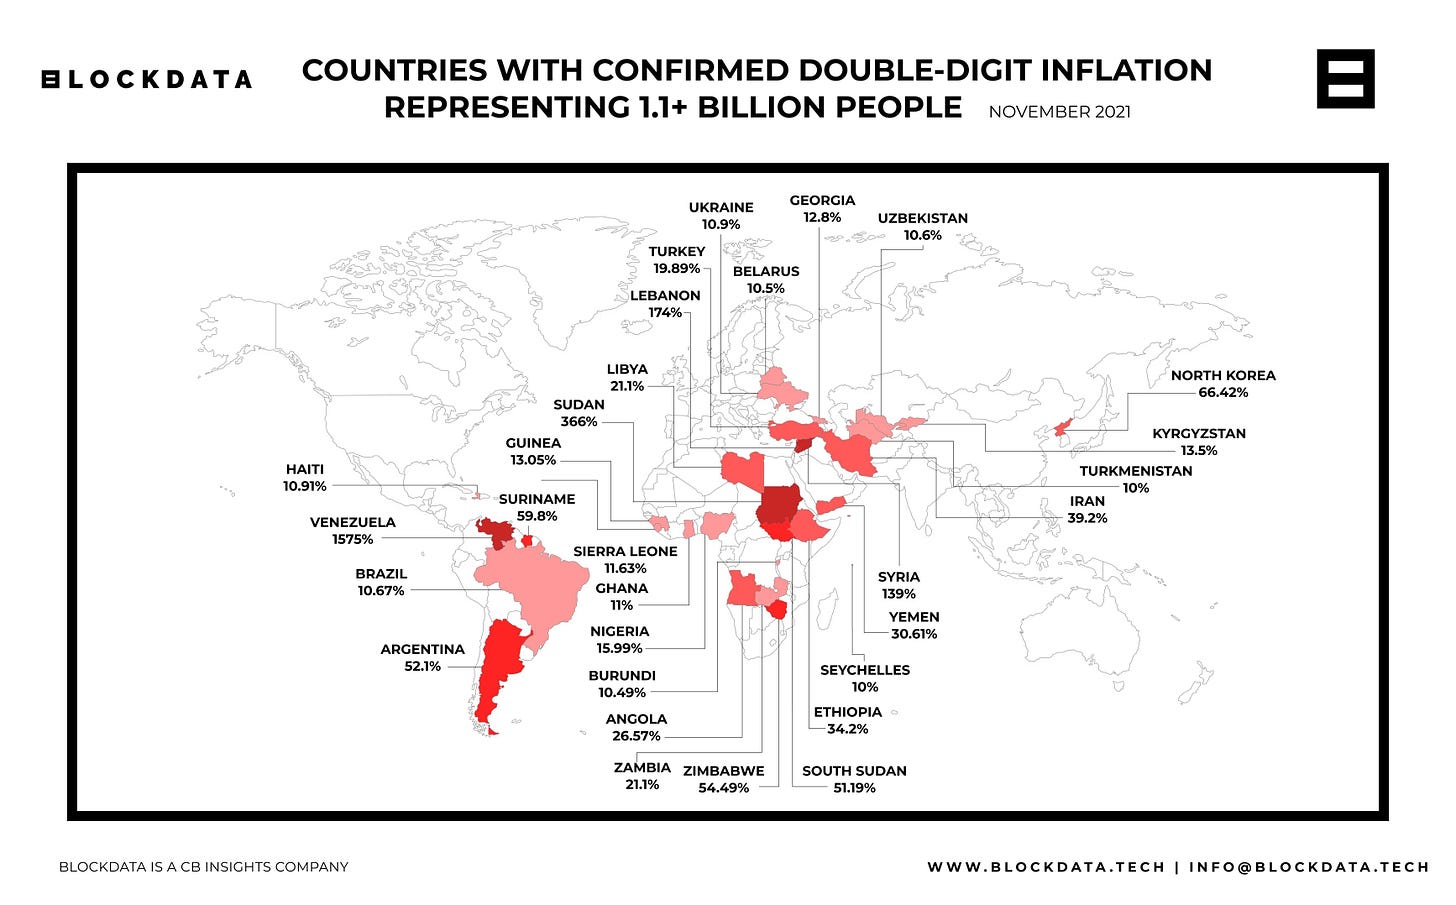 Countries with a confirmed 10%+ annual inflation rate per Tradingeconomics.com data